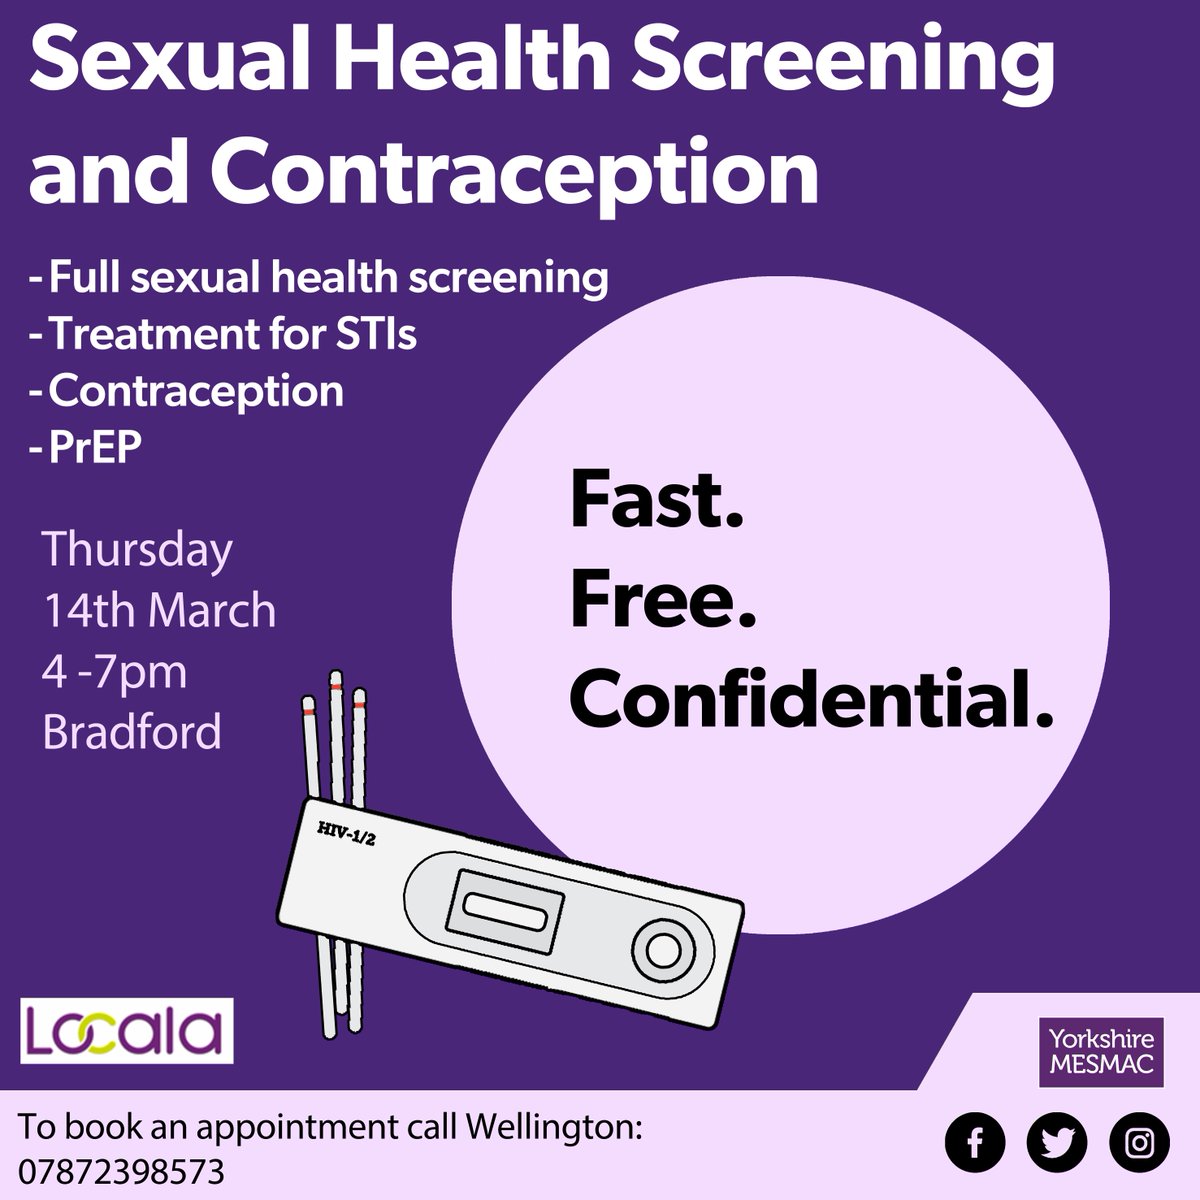 Think you’ve been at risk and need a full sexual health screening? We're running a clinic with @locala_safesex every month Get tested for Gonorrhoea, Chlamydia, HIV and Syphilis! Call Wellington to book an appointment: 📞 07872398573 #sexualhealth #lgbtq #PrEP #contraception